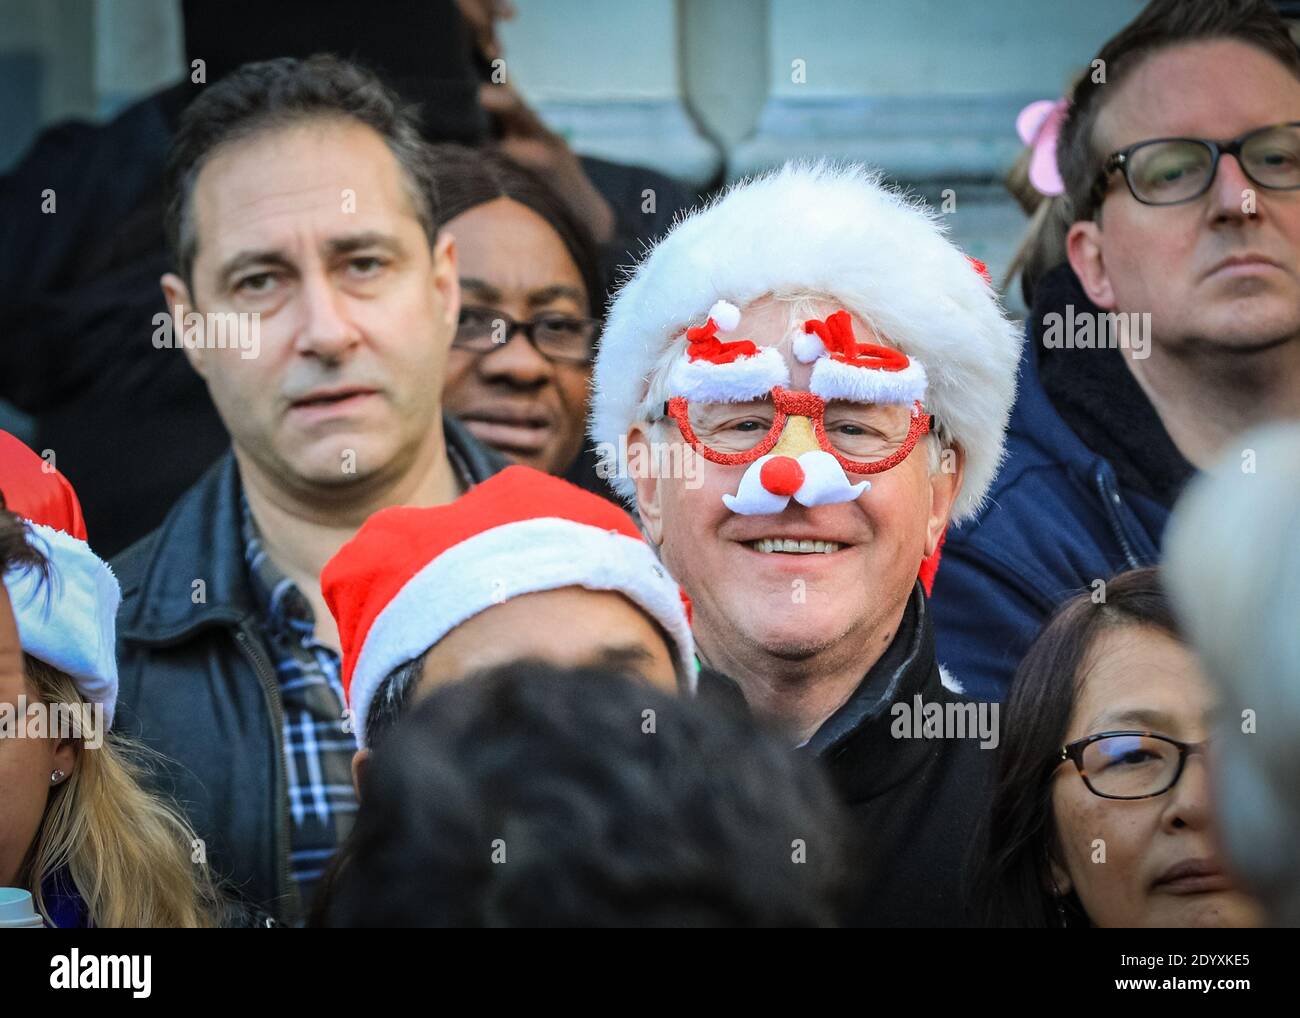 Man in Santa hat and comedy Christmas glasses, smiles in spectator crowd, London, England, UK Stock Photo